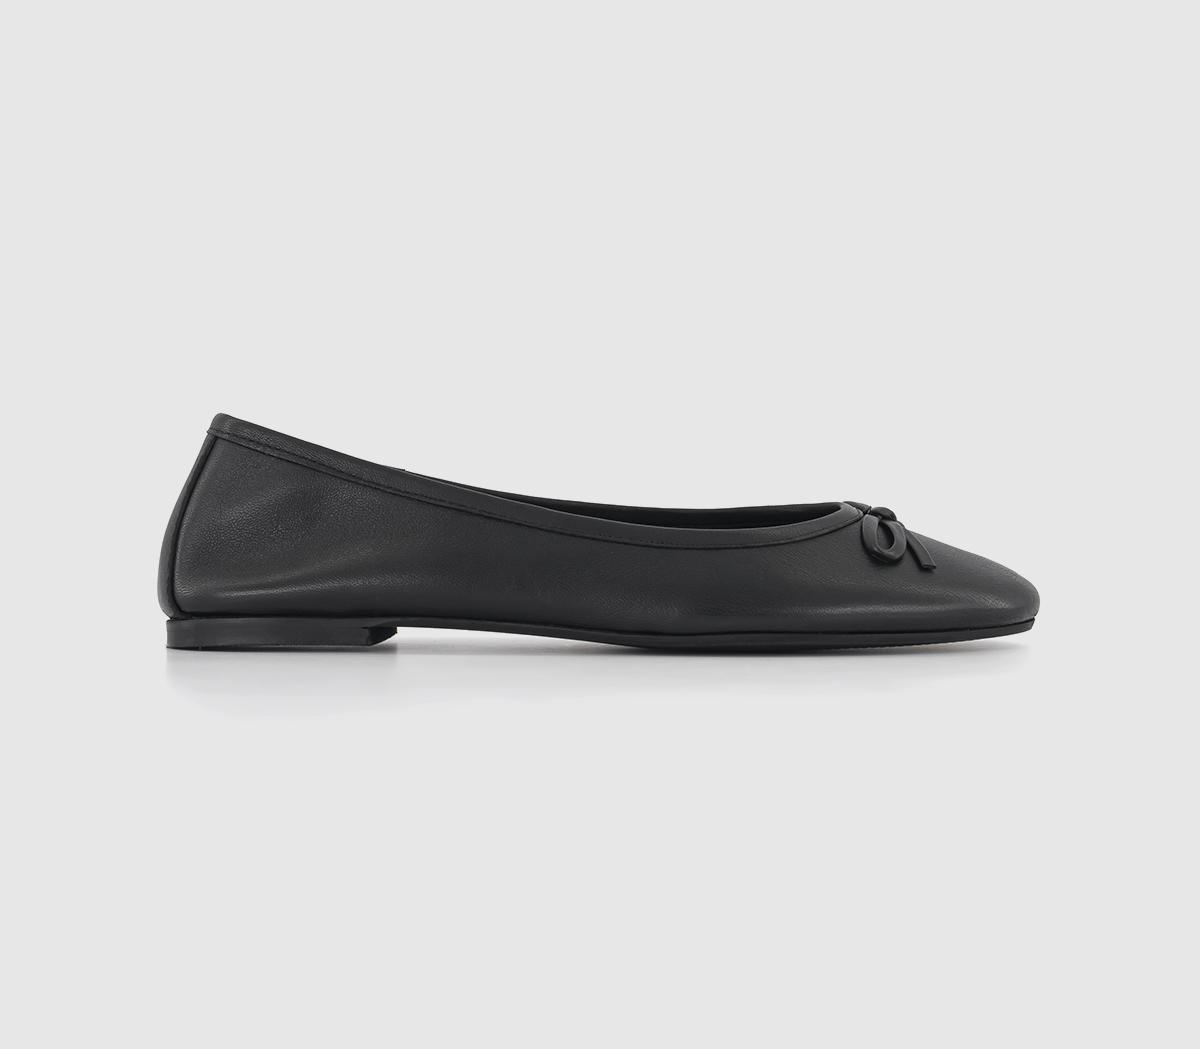 OFFICEFrazzle Leather Ballerina ShoesBlack Leather